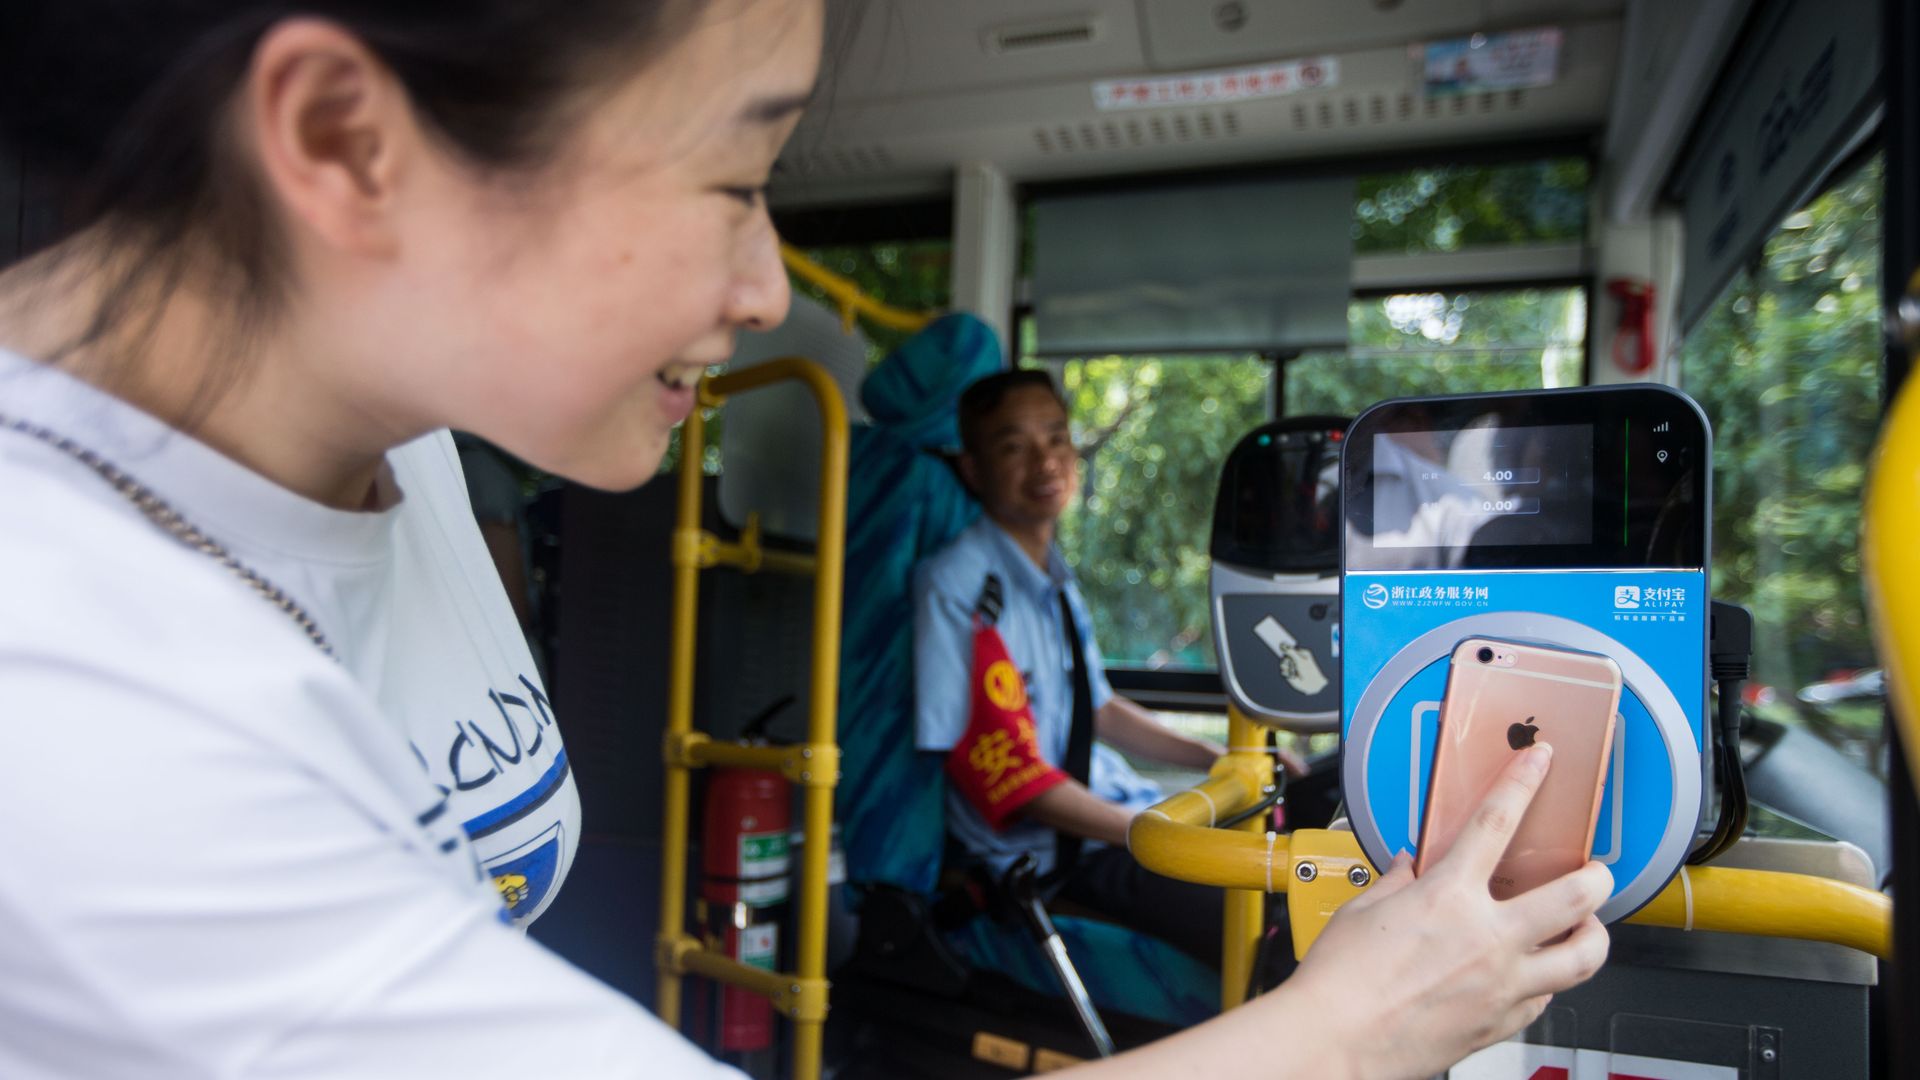 Using Alipay on the bus